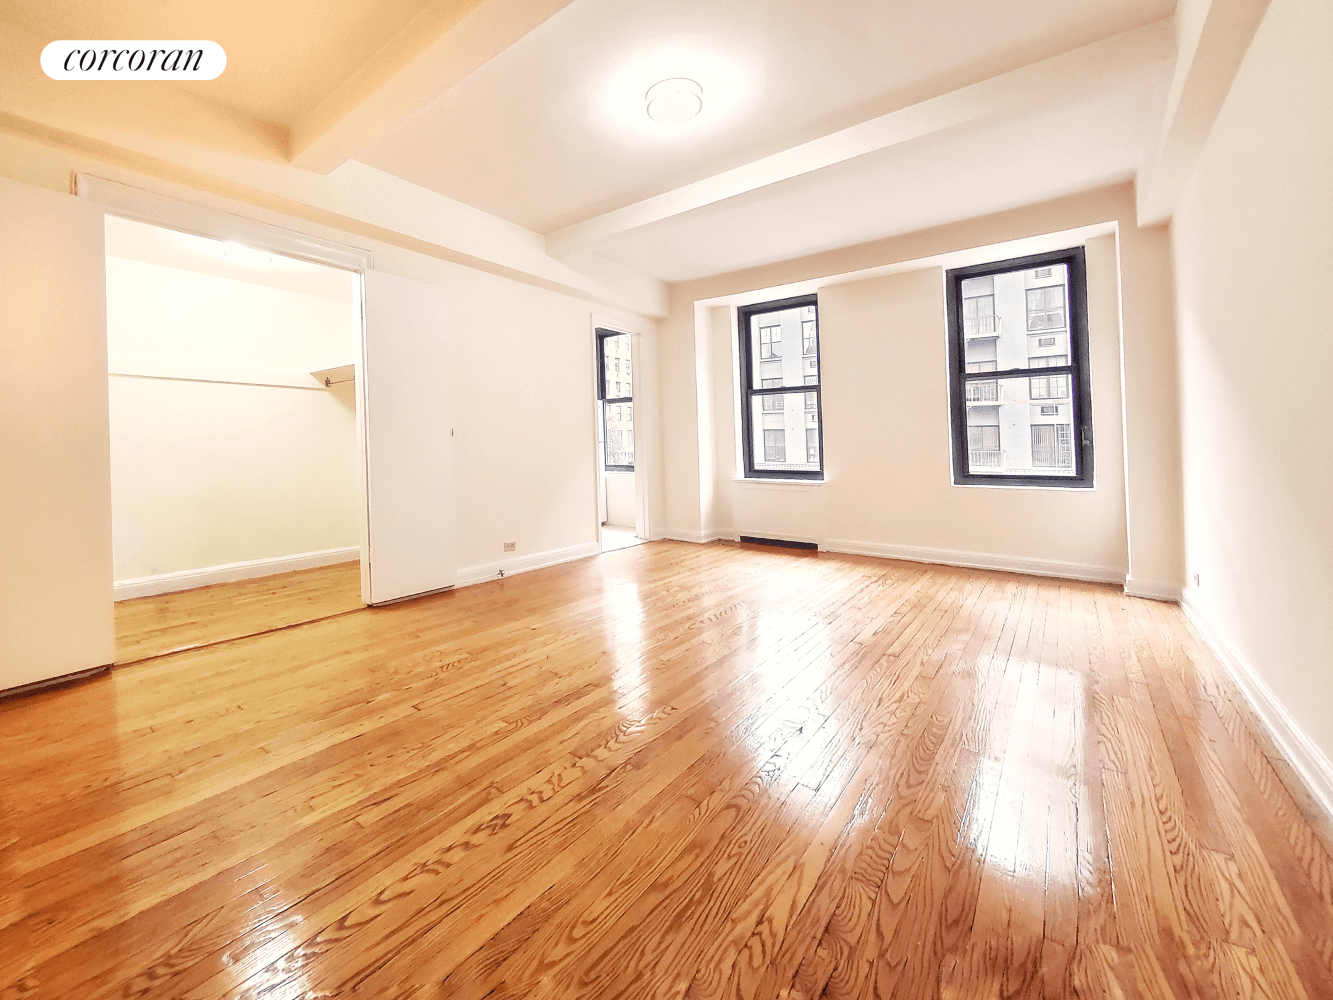 200 West 16th St, 3B provides you with the natural light and space for work from home that you have been searching for.